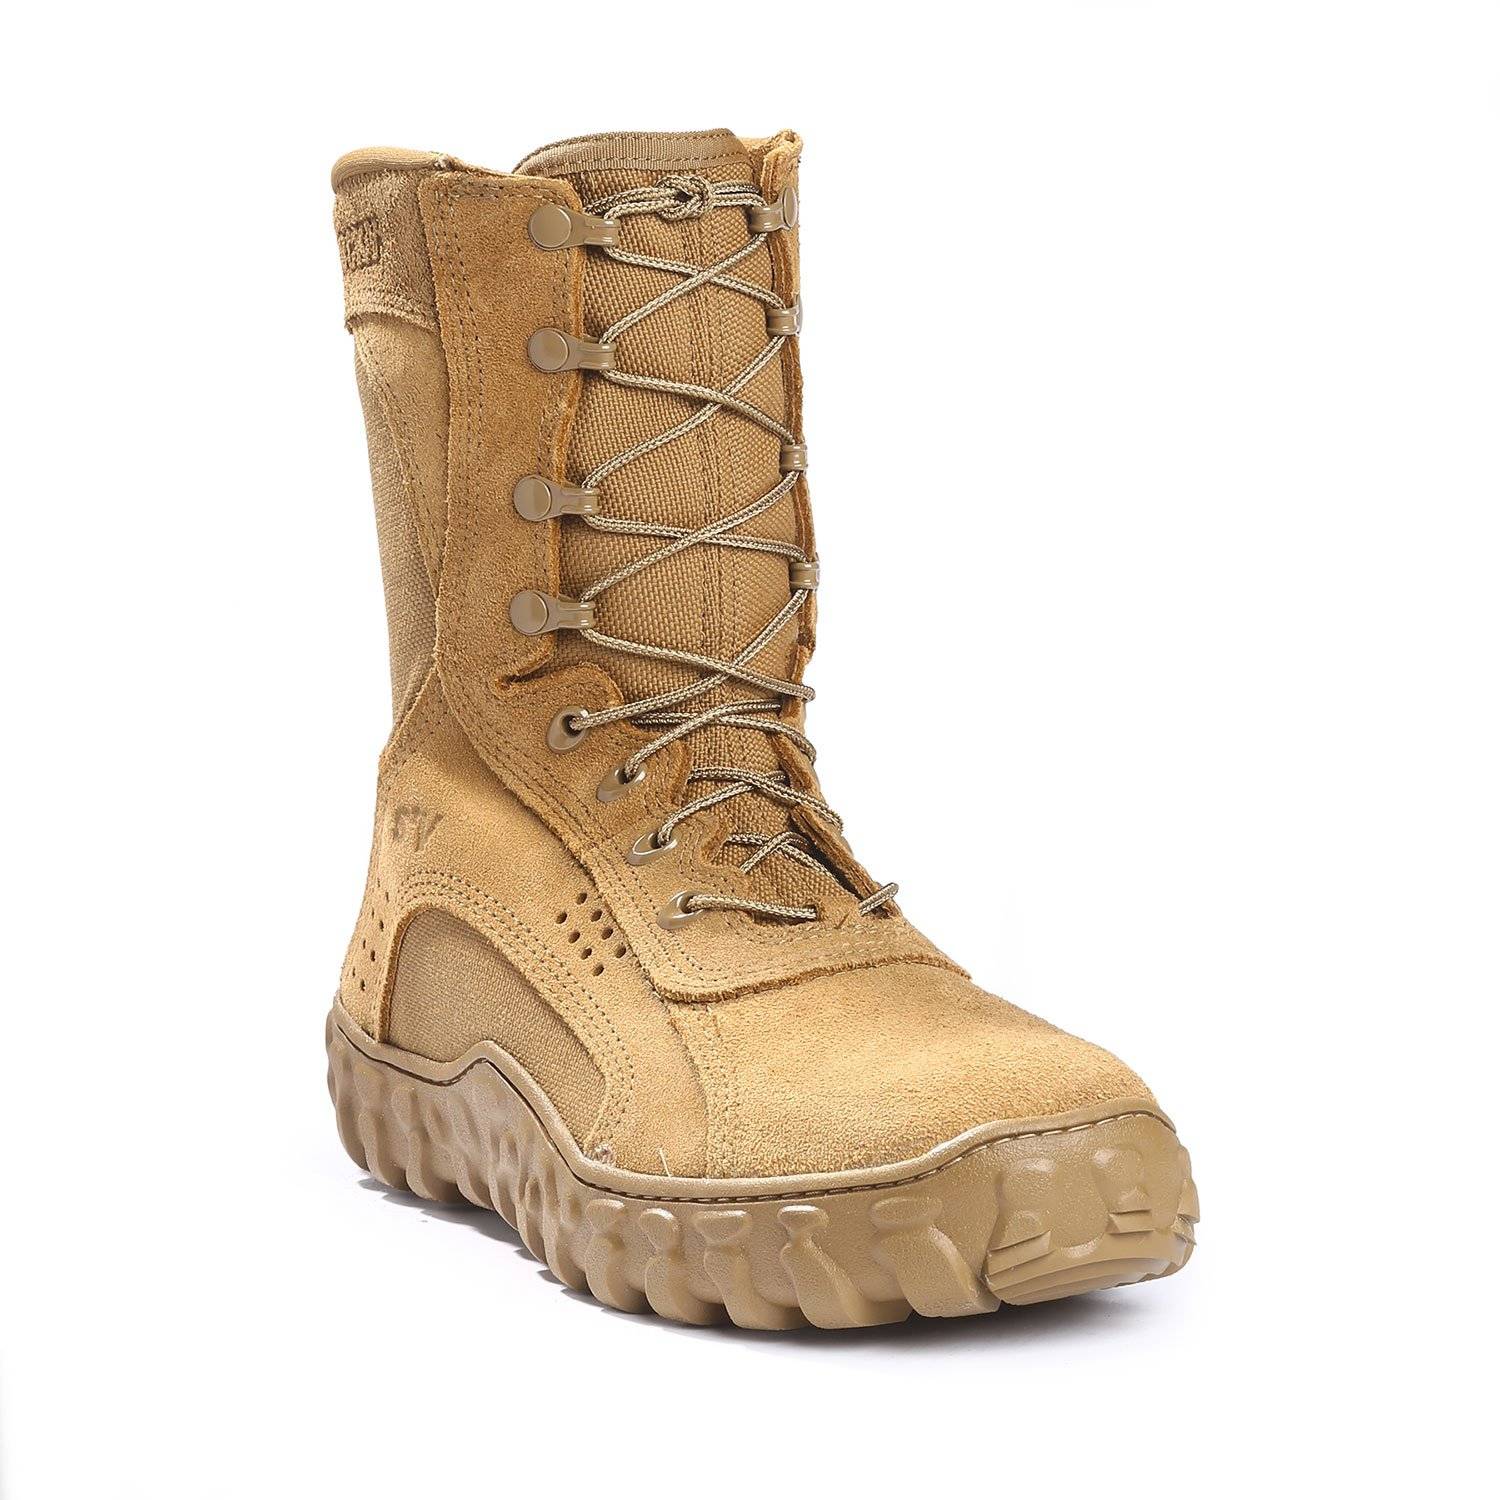 Rocky S2V Tactical Military Boot